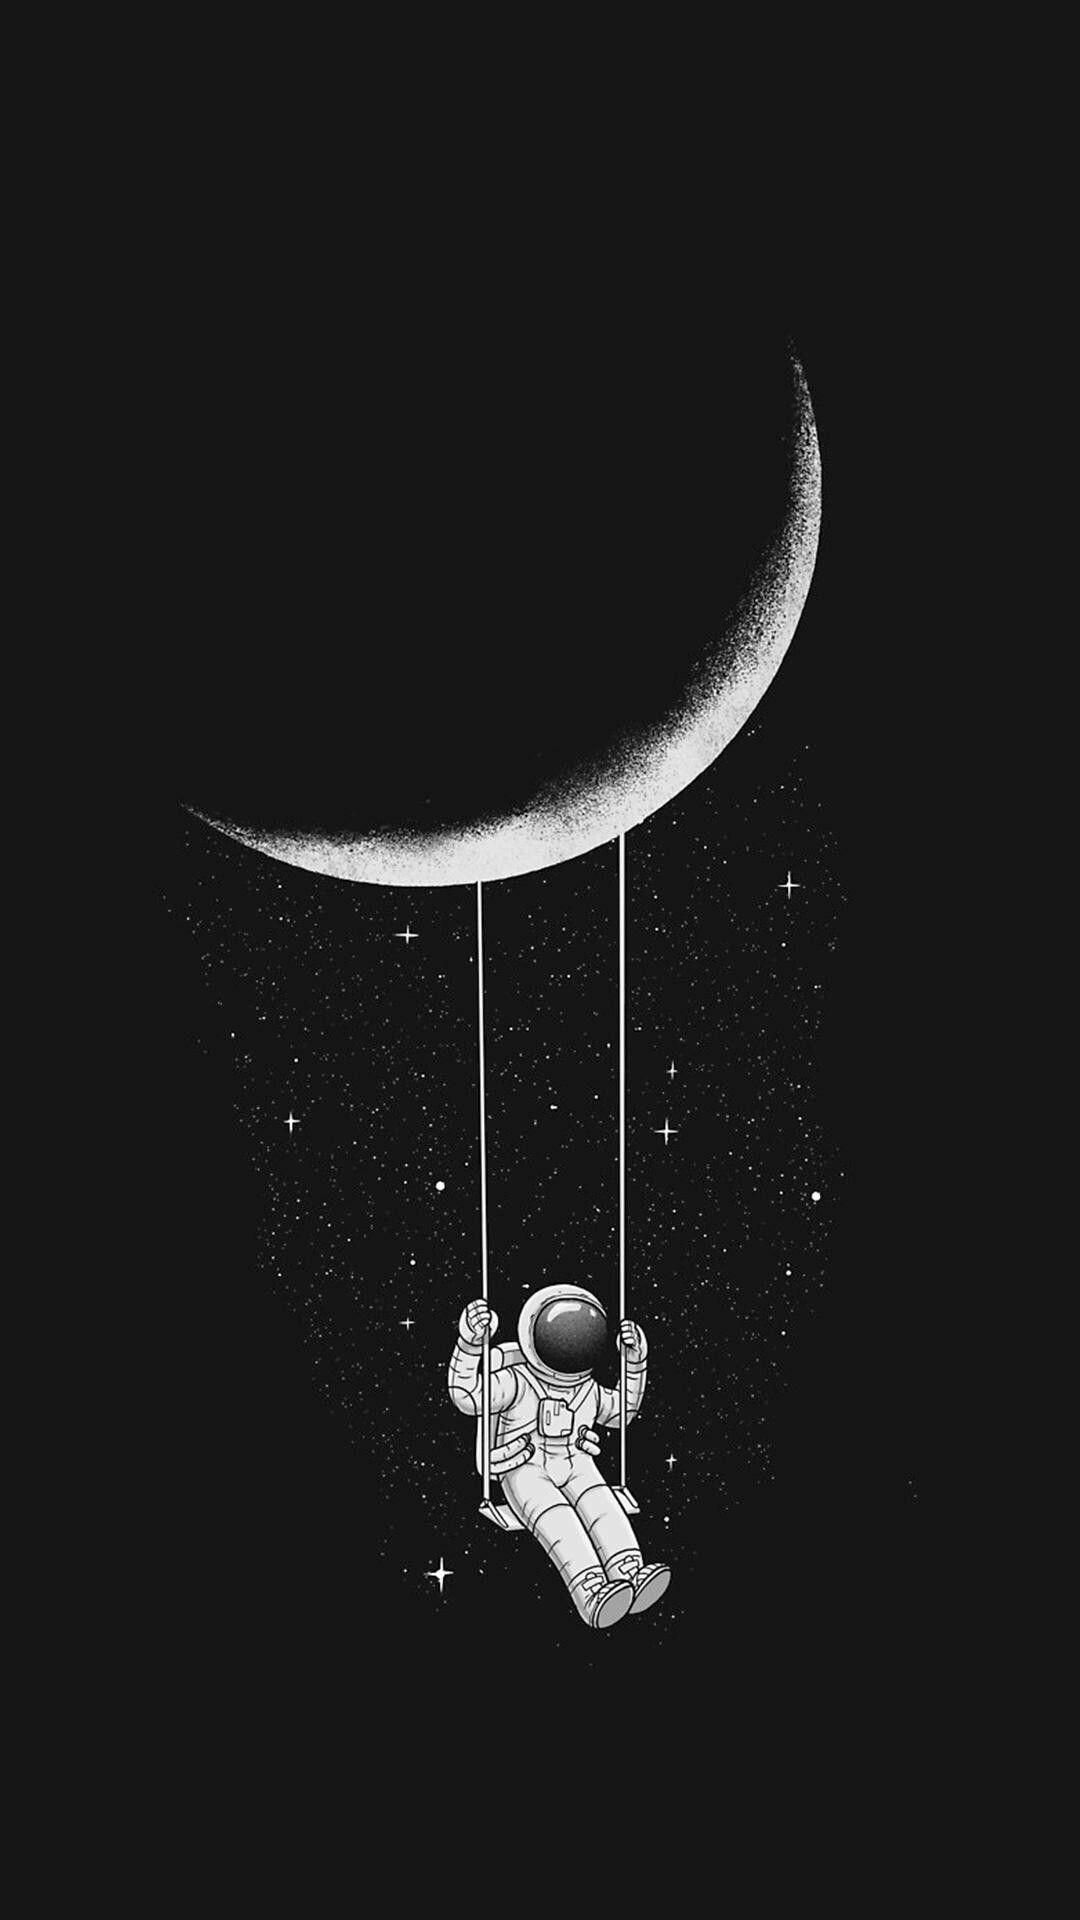 Black and White Astronaut Wallpapers - Top Free Black and White